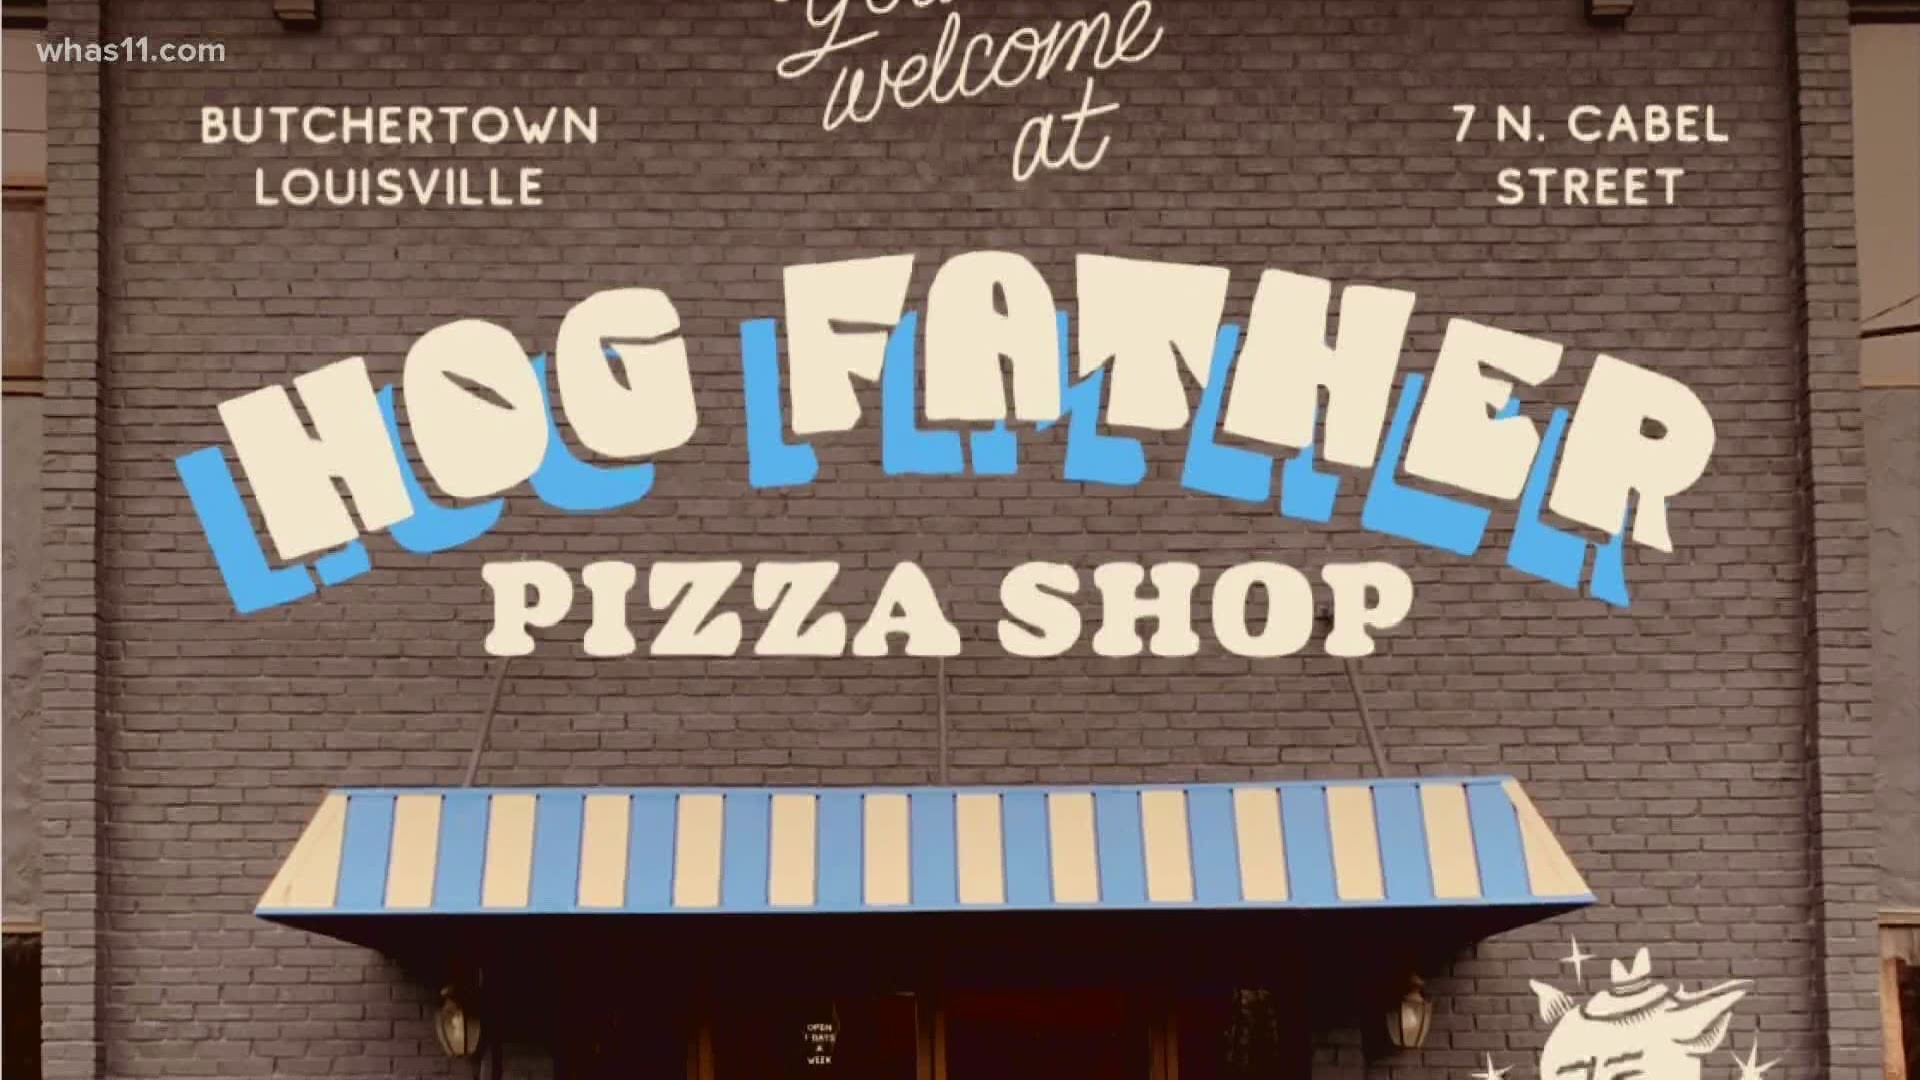 The Hog Father Pizza Shop opens Monday, Feb. 8.